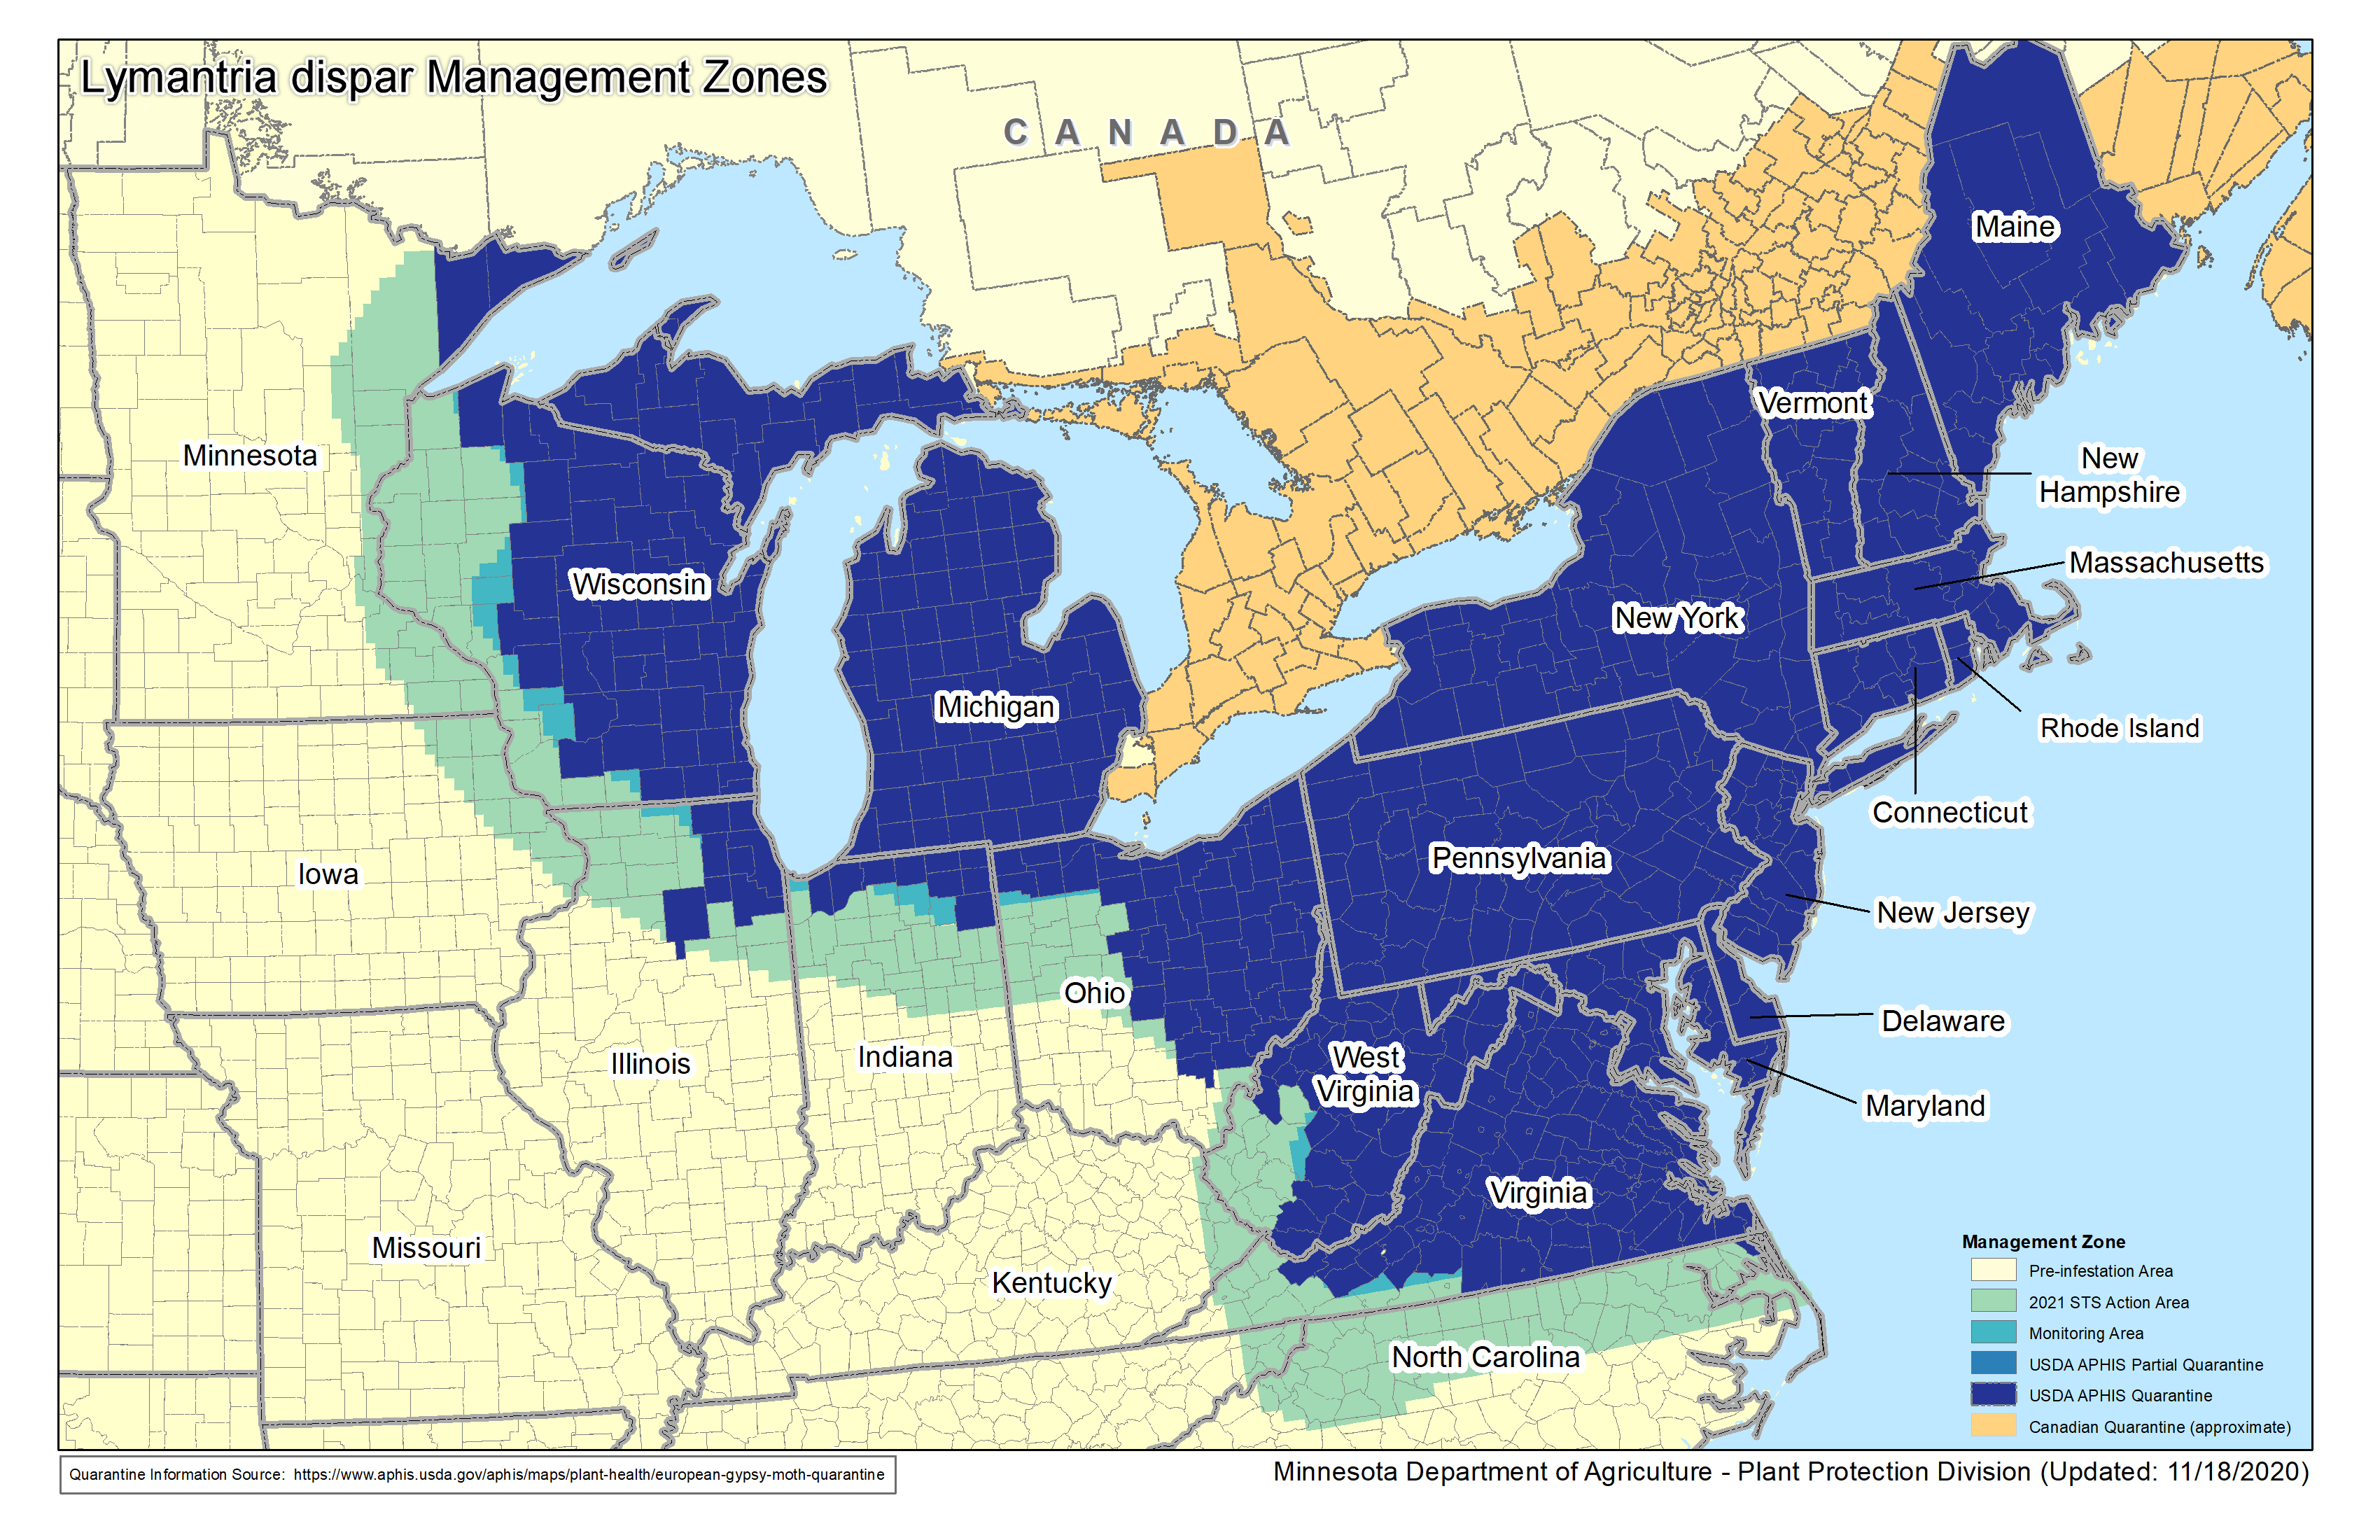 Map showing northeast states of United States with APHIS quarantine areas in blue for most of or all of states from Virginia to Maine then west to West Virginia and Ohio and north to Michigan and Wisconsin.  Buffering Slow The Spread Action Areas wrap from North Carolina to West Virginia, Ohio, Indiana, Illinois, Wisconsin and just into Iowa and Minnesota.  Quaratine area growing slightly southwest from Chicago, Illinois